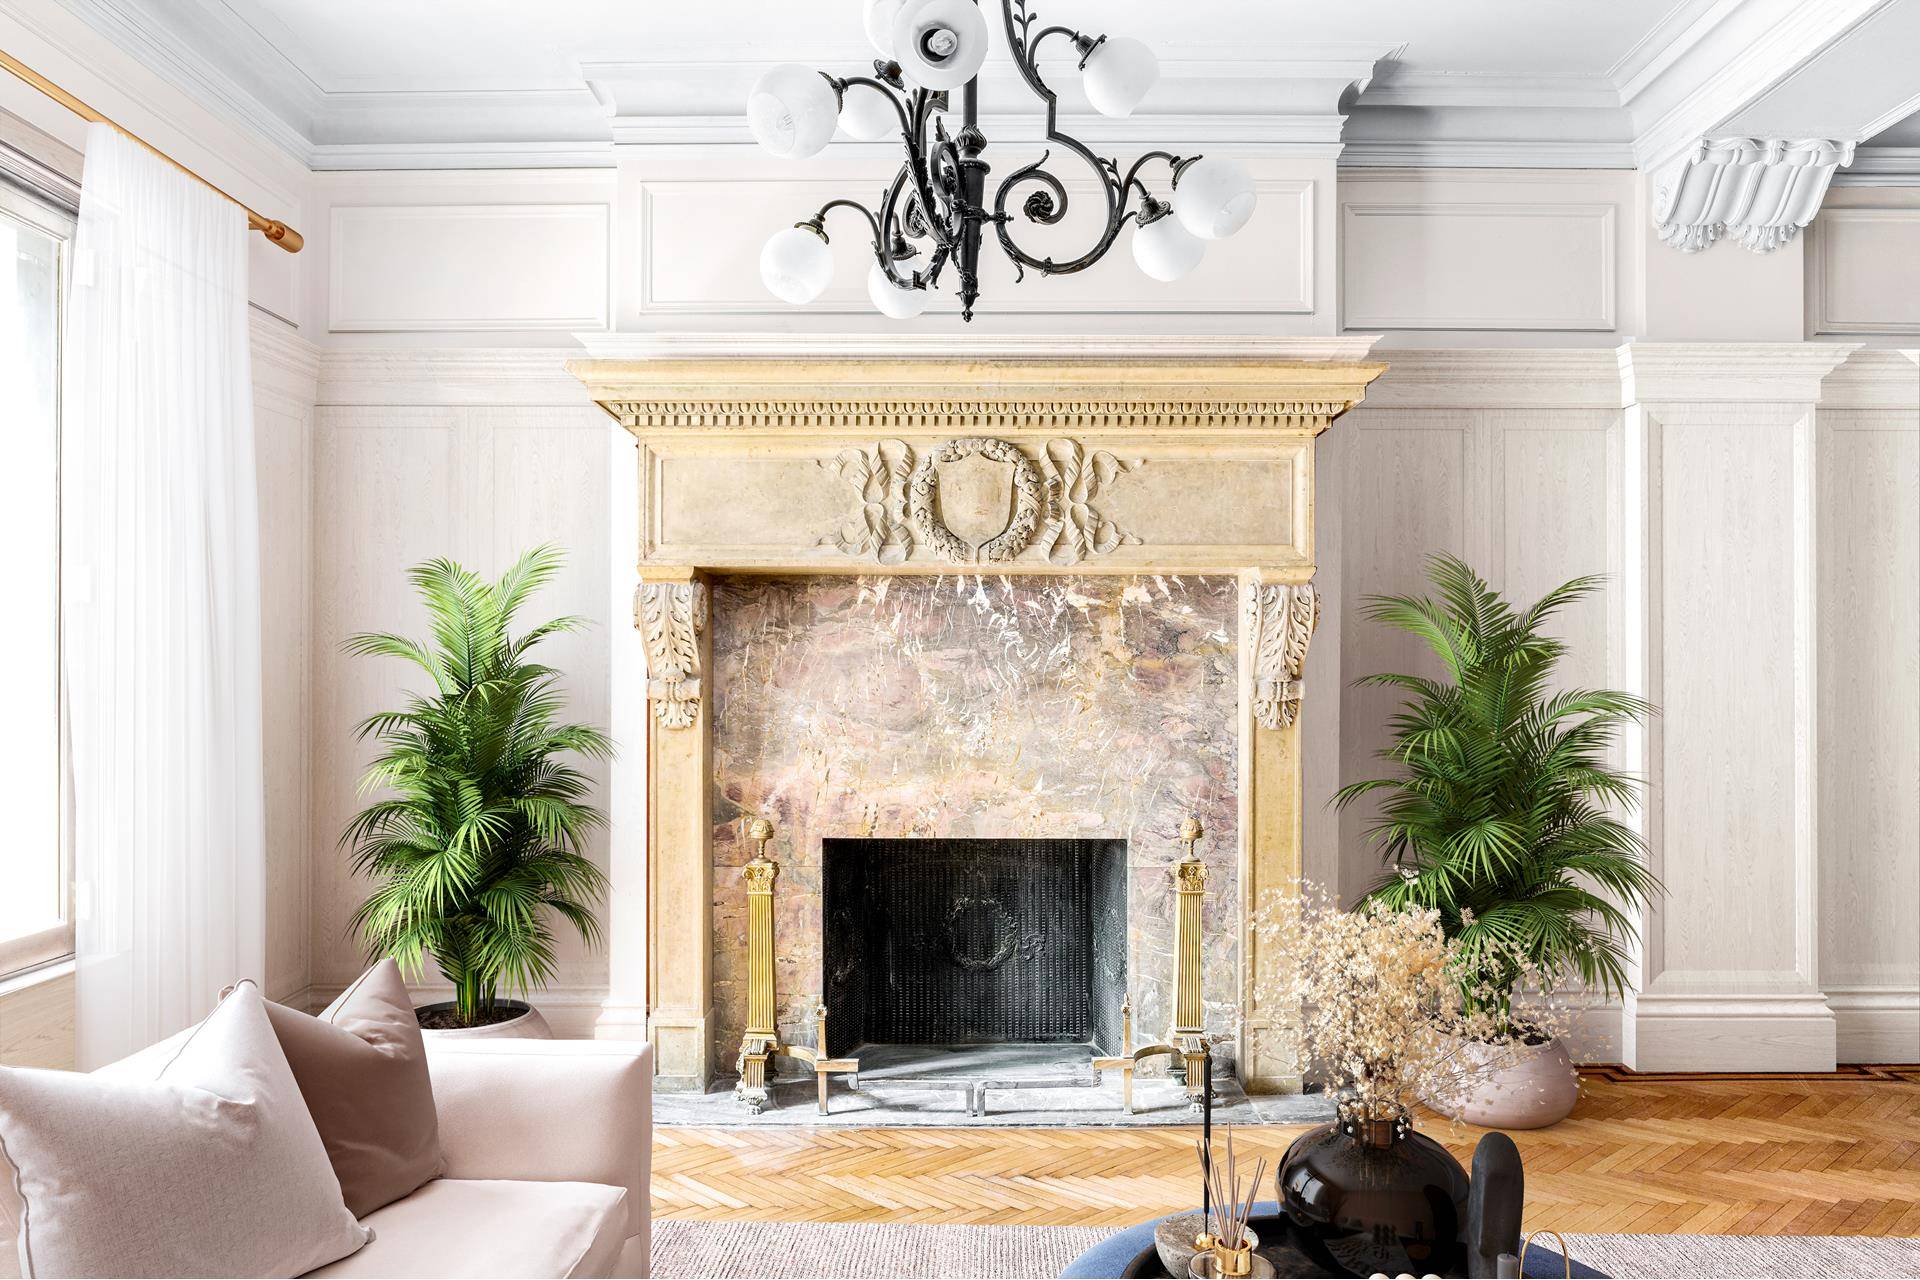 The Tracy Mansion, a beloved Park Slope landmark with a dignified Neo Classical facade of marble has been reborn as seven exquisitely crafted condominium residences.